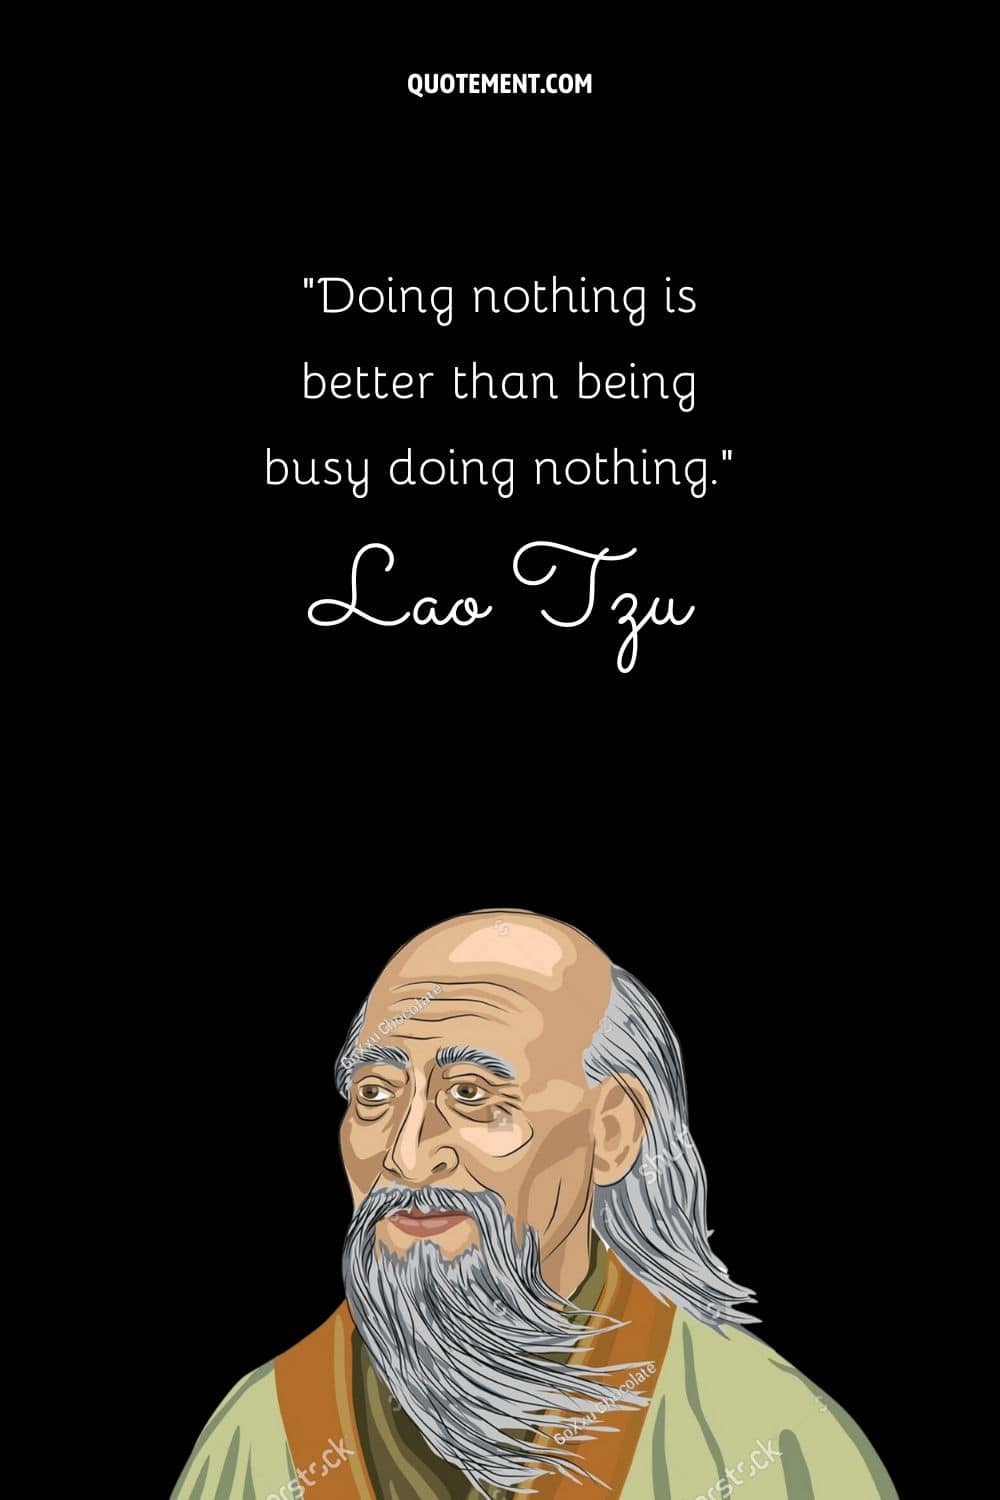 Doing nothing is better than being busy doing nothing.